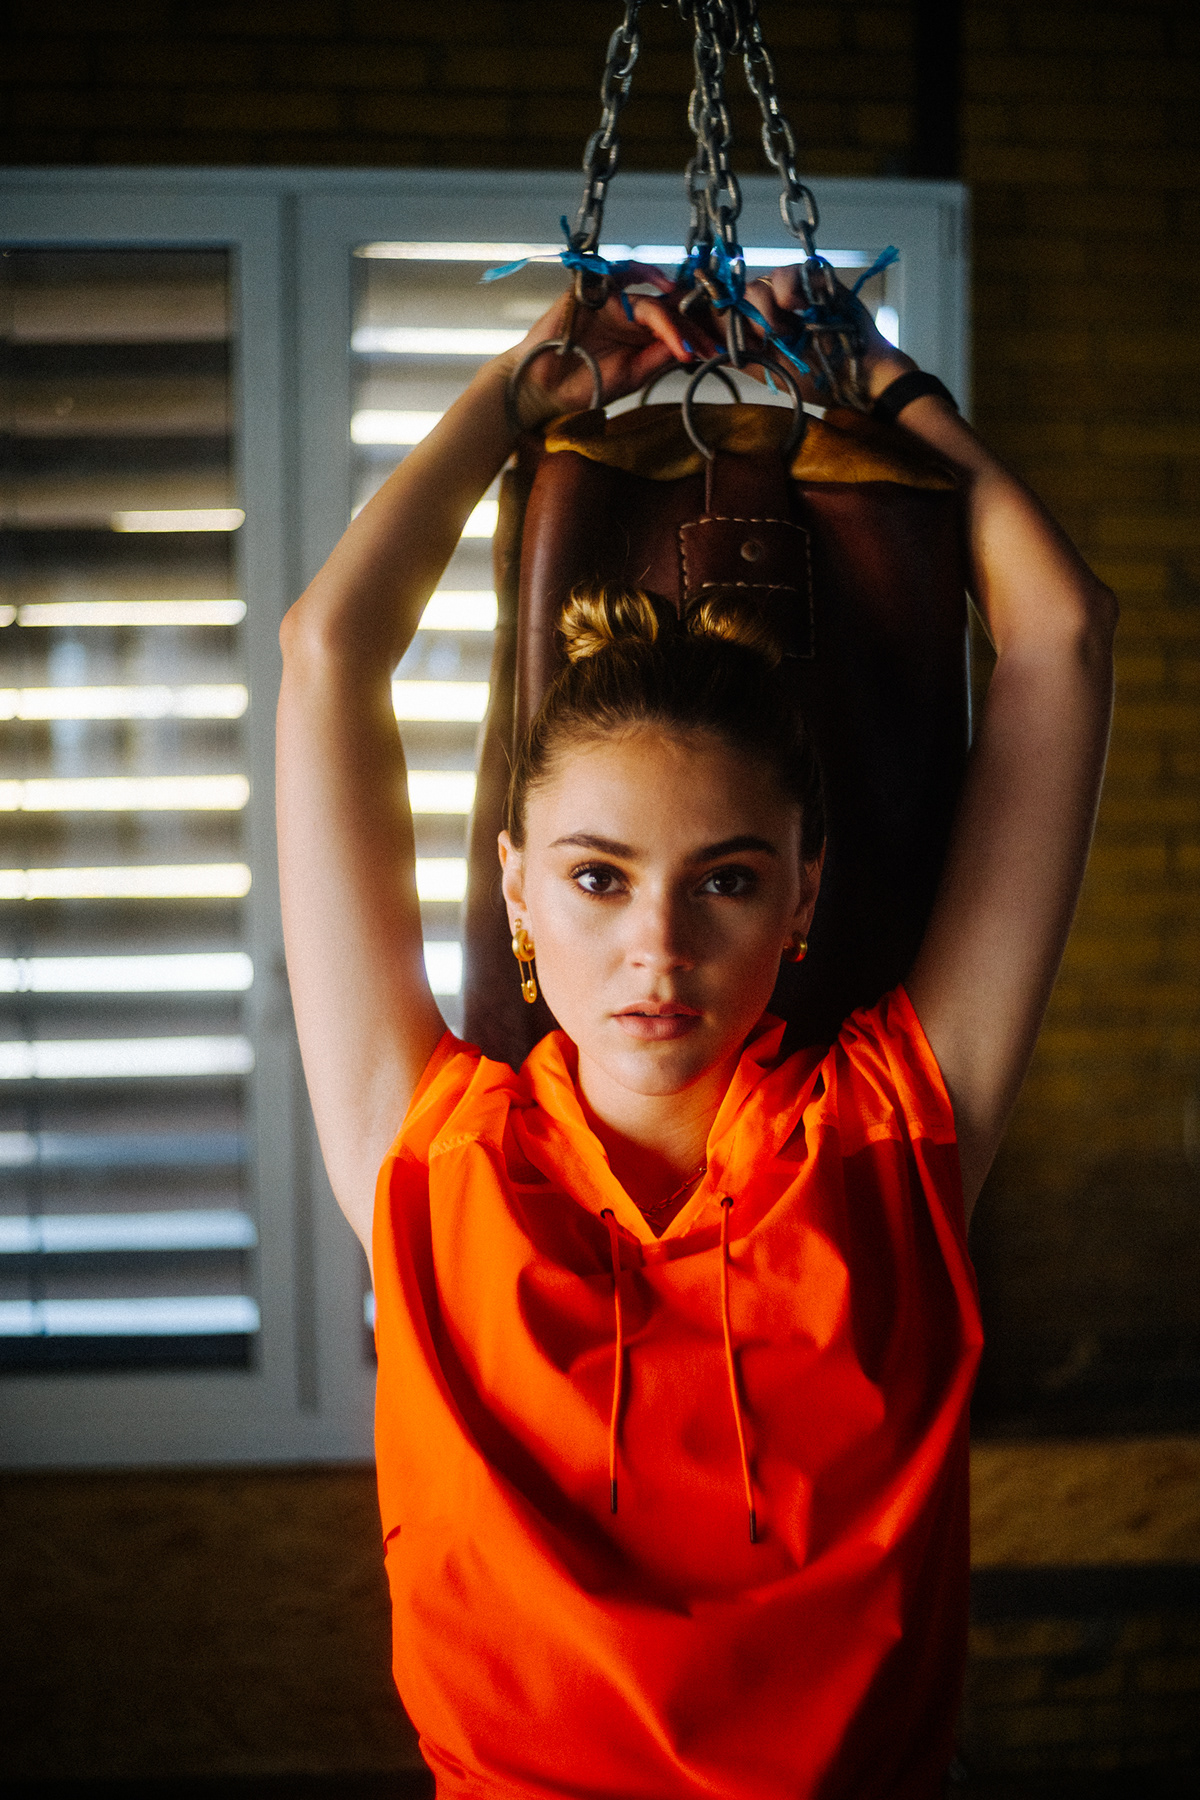 andre josselin stefanie giesinger Nike nike women Leica leica m10p 35mm About you commercial lifestyle